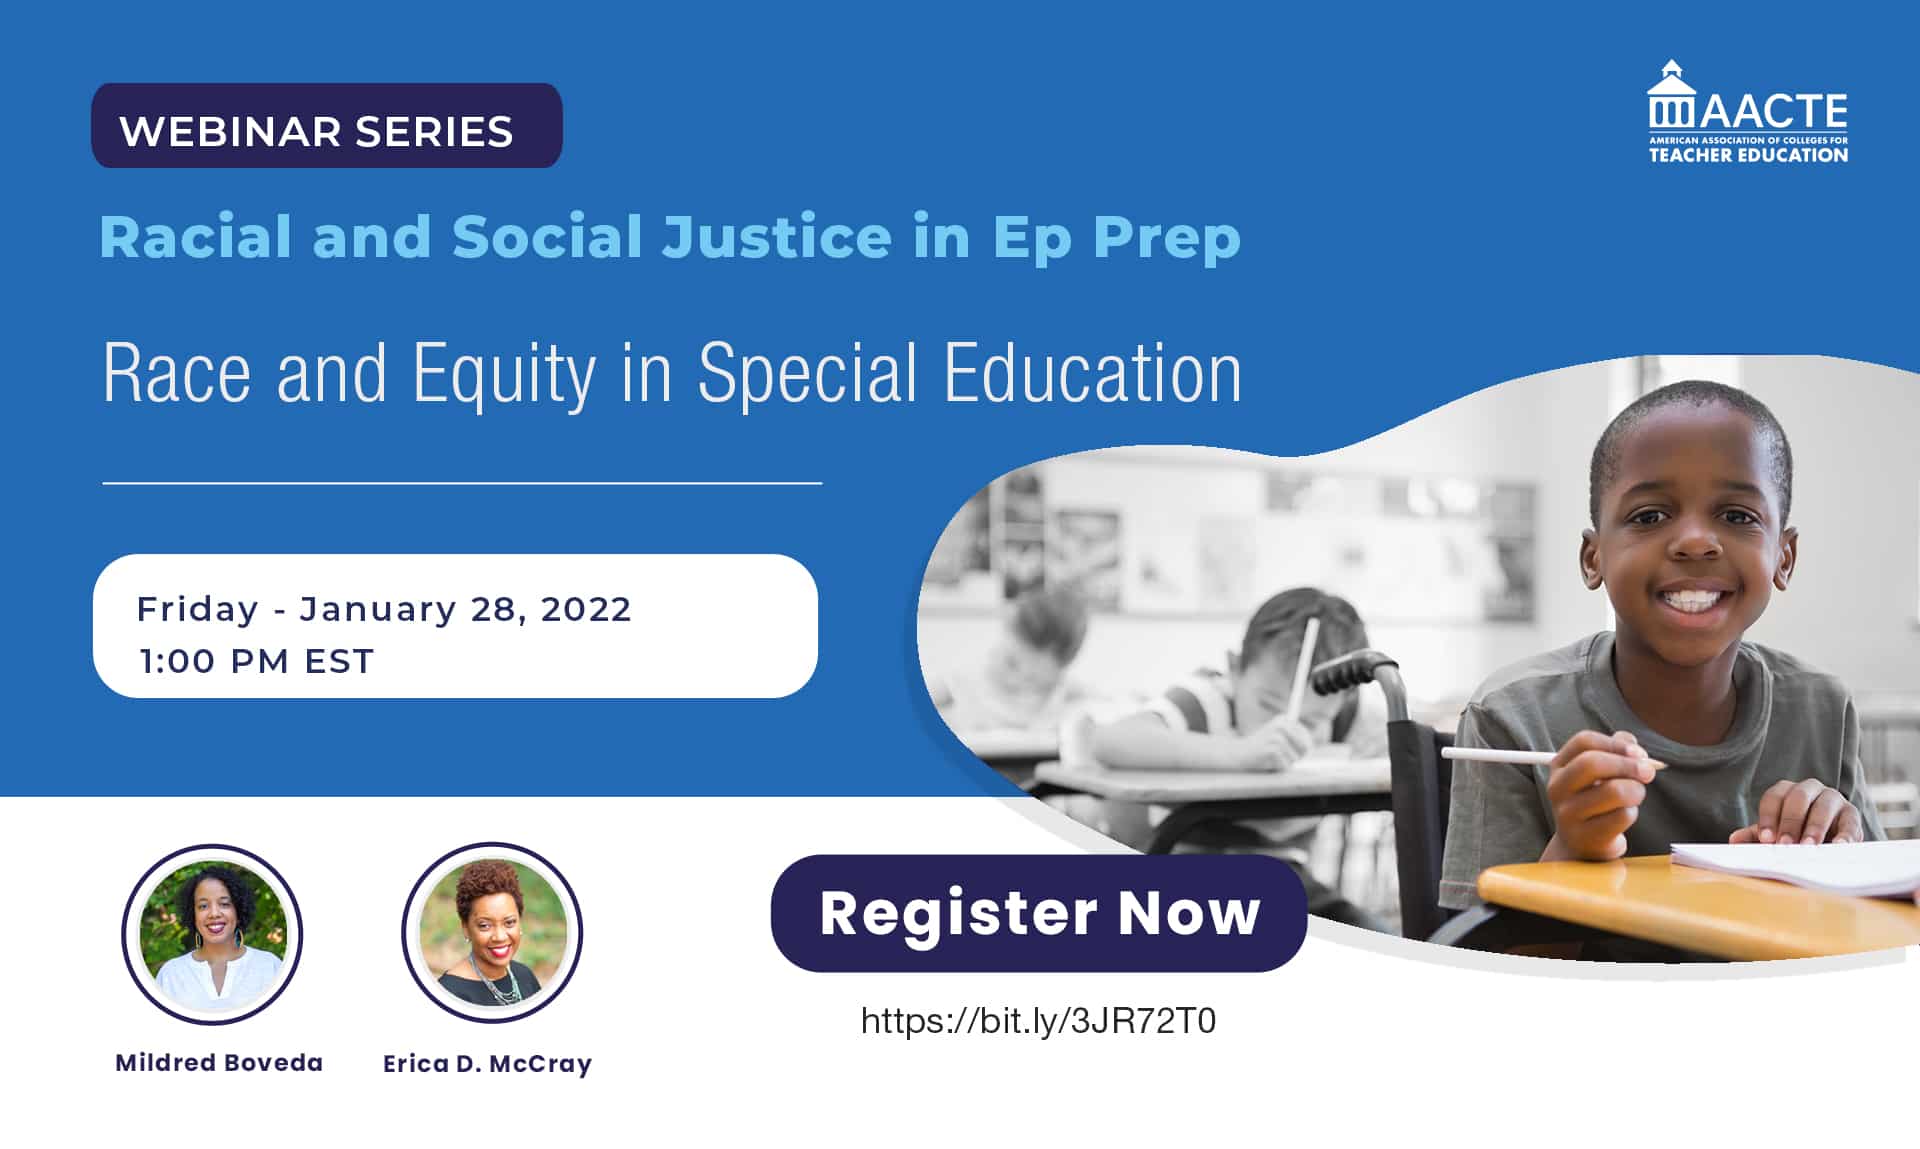 Race and Equity in Special Education